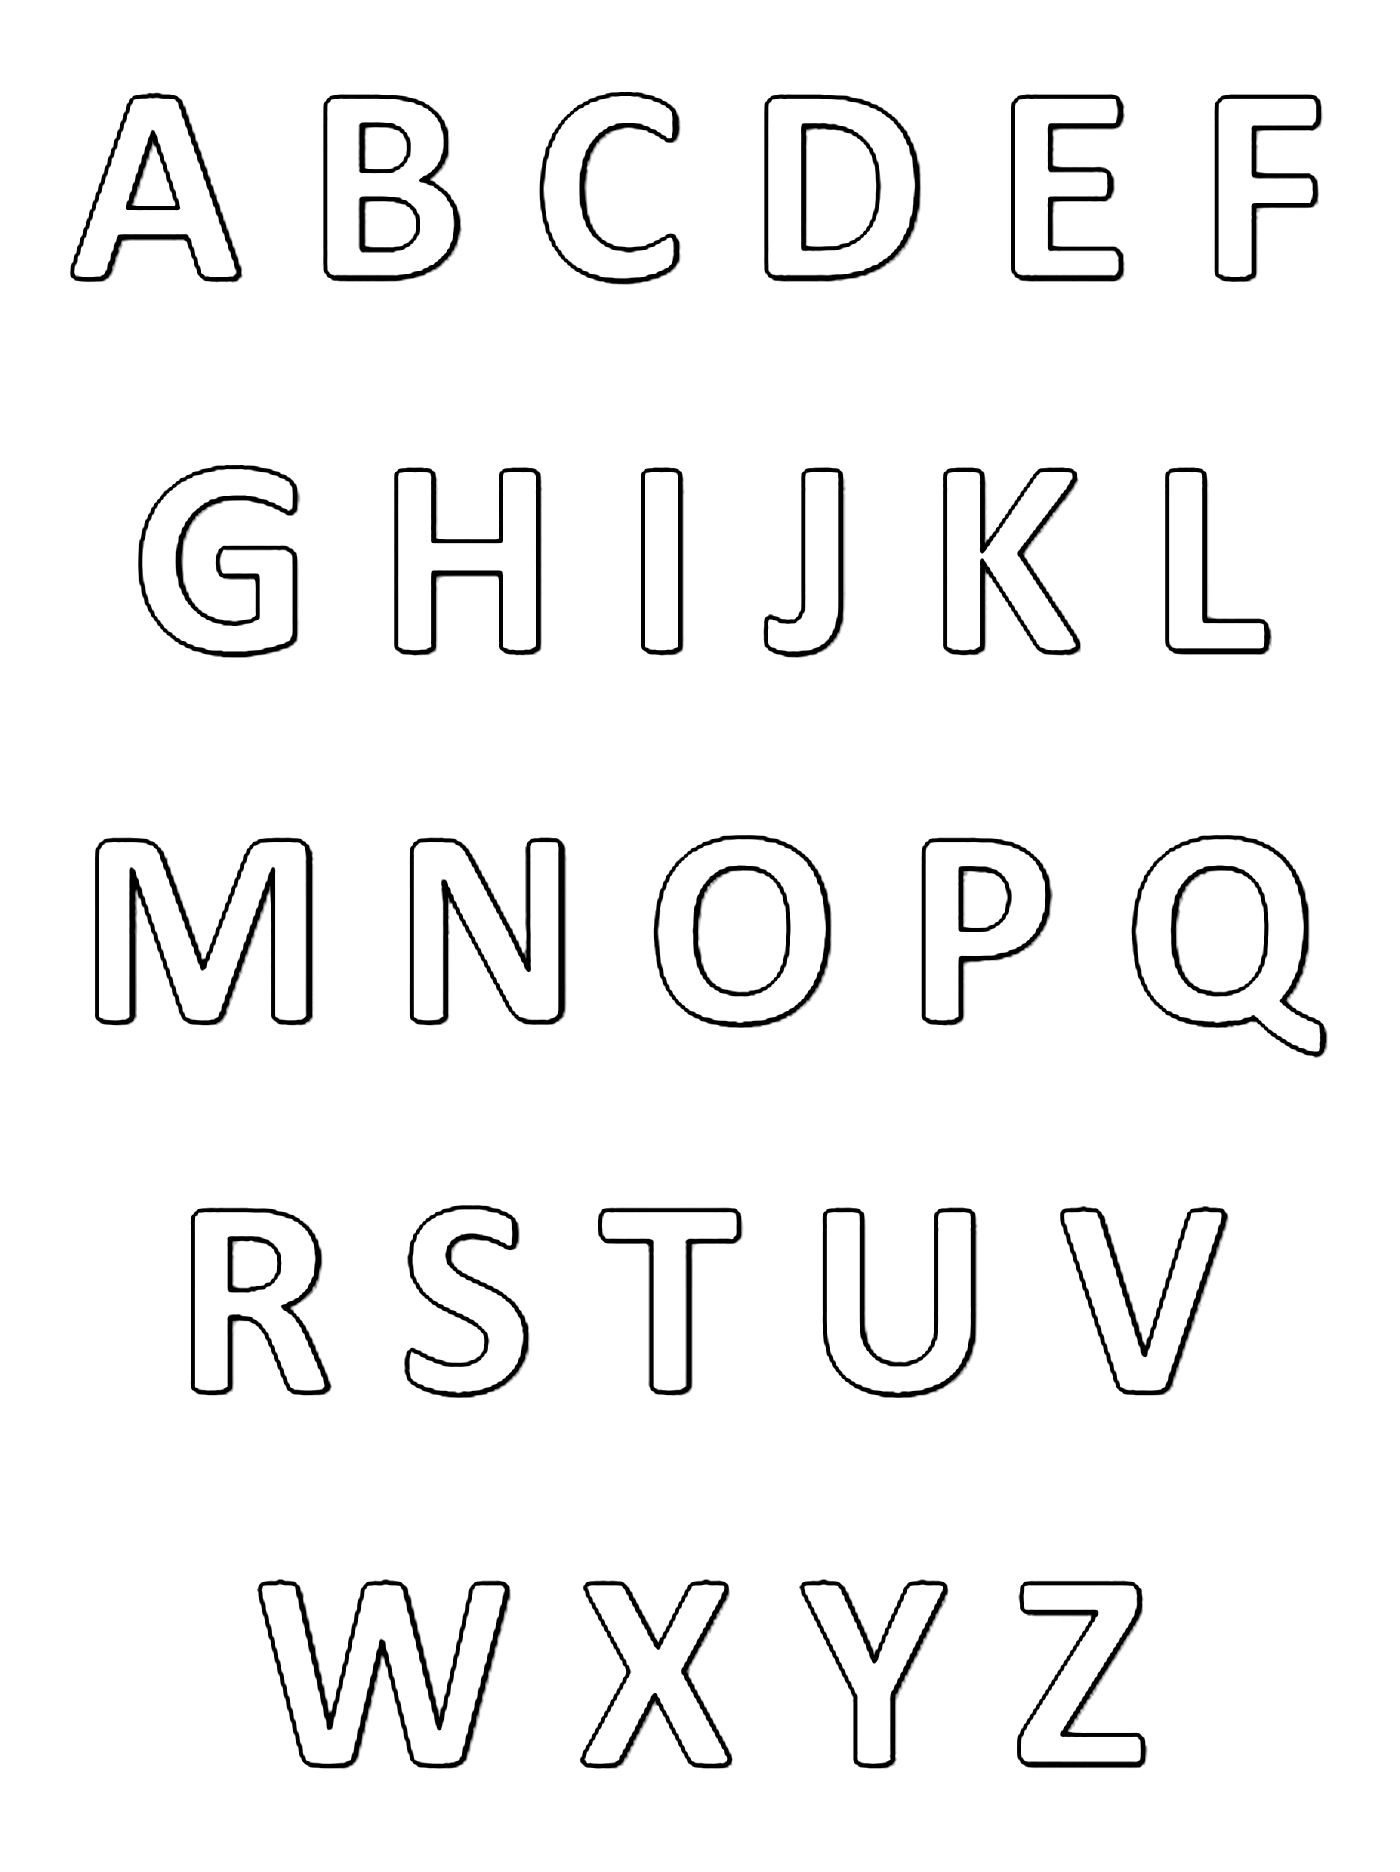 Very simple alphabet worksheet to print & color